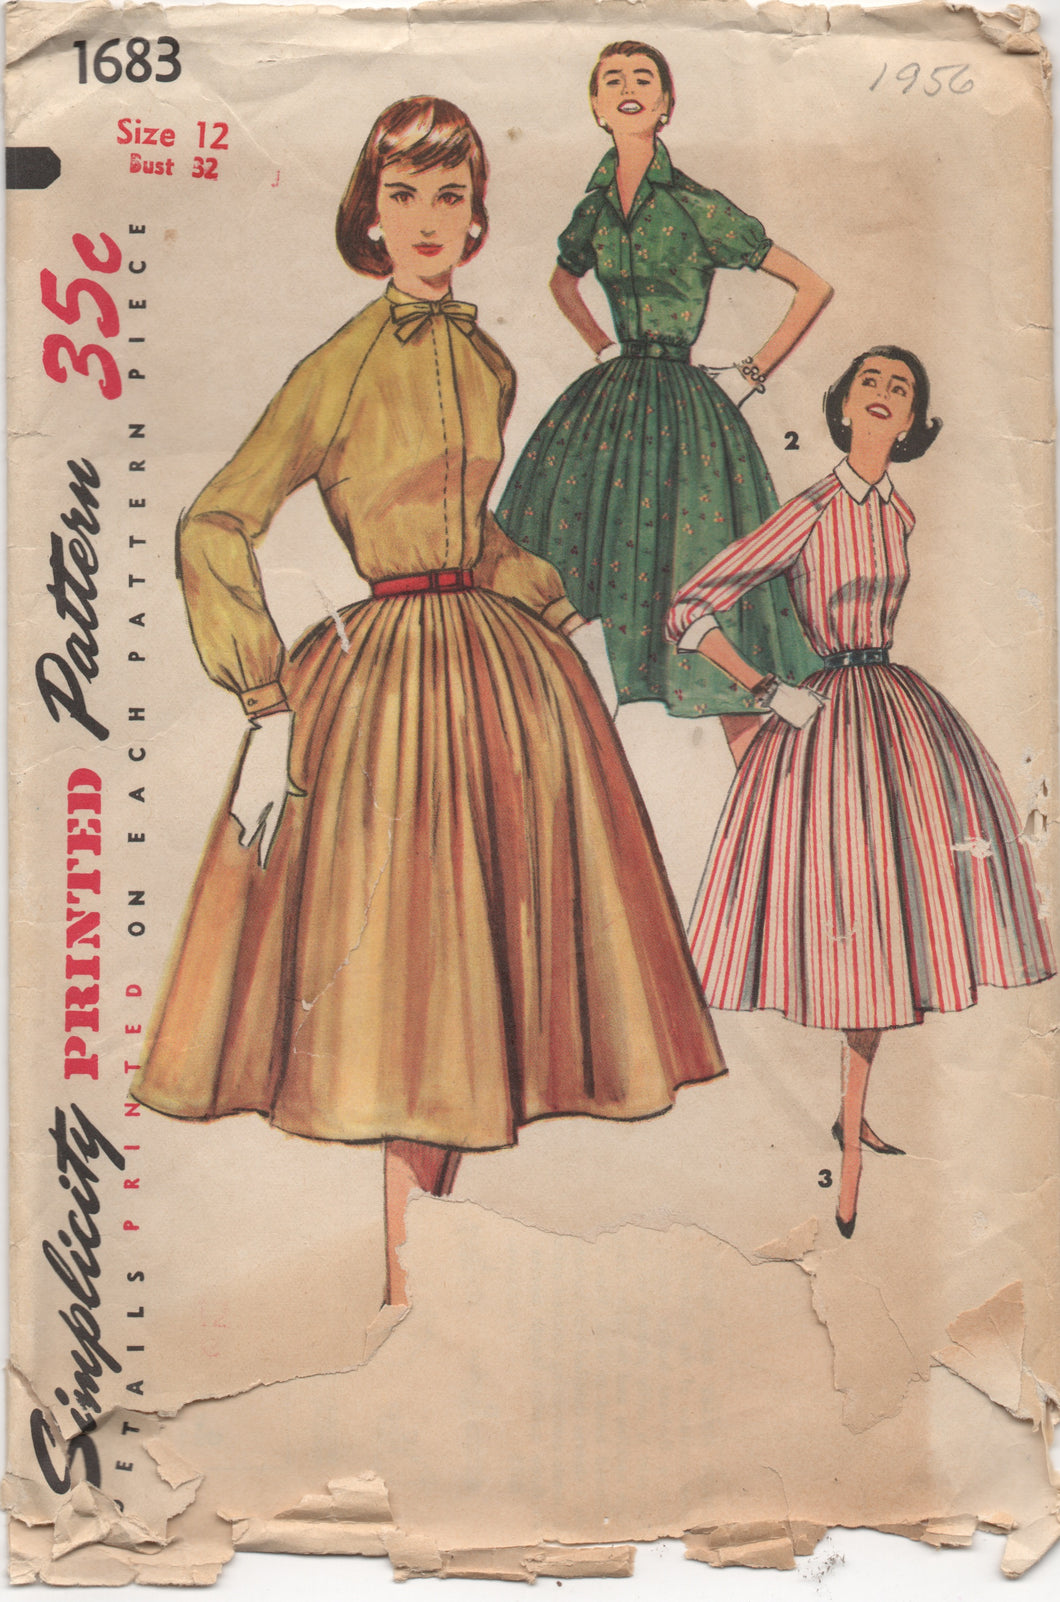 1950's Simplicity One Piece Dress with High Neckline, Pleated Skirt and Bow Accents - Bust 32